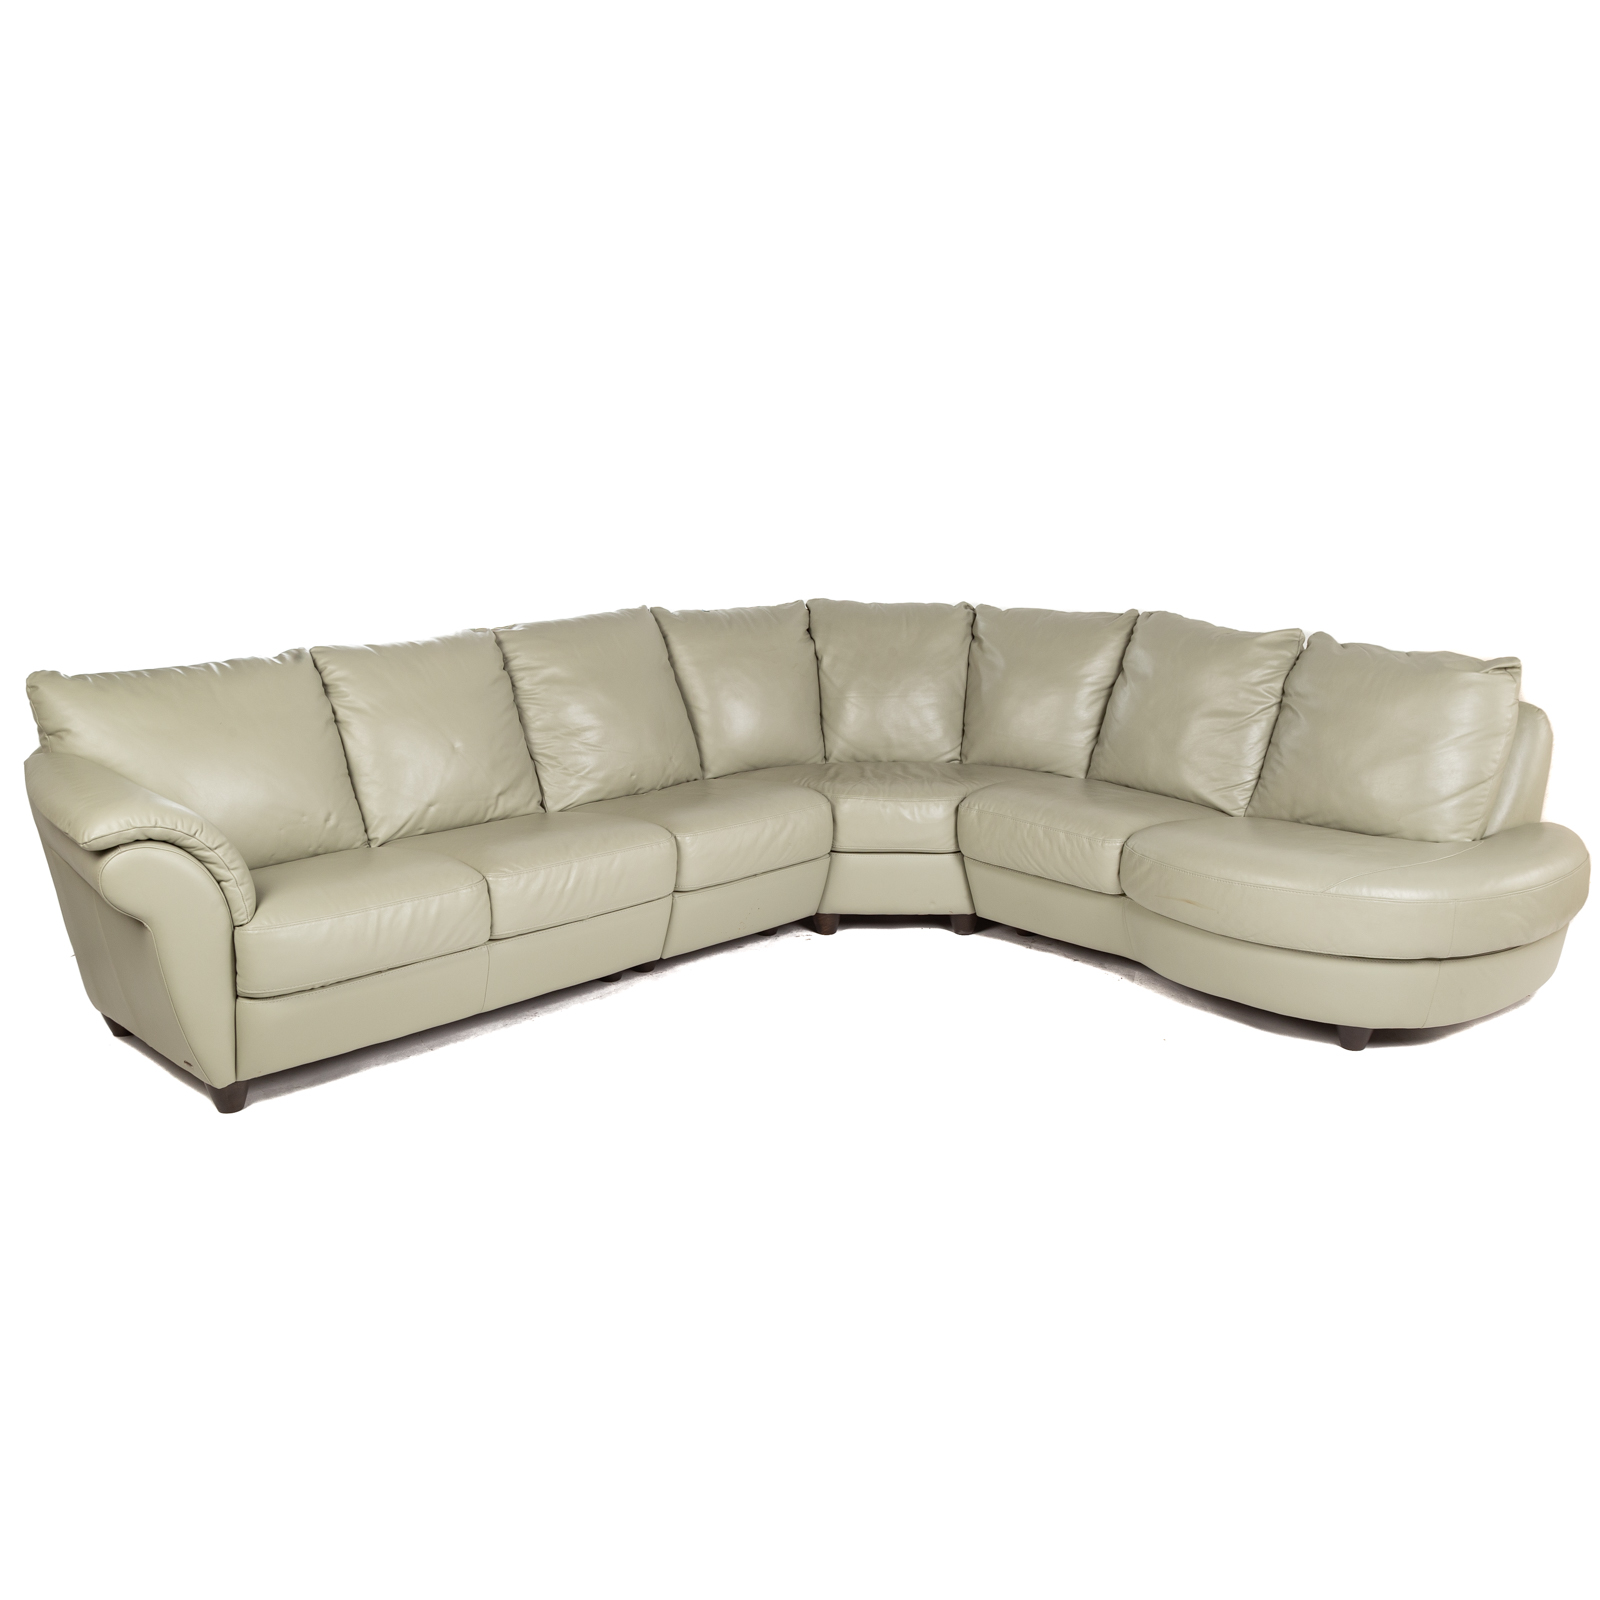 NATUZZI CONTEMPORARY LEATHER SECTIONAL 369469